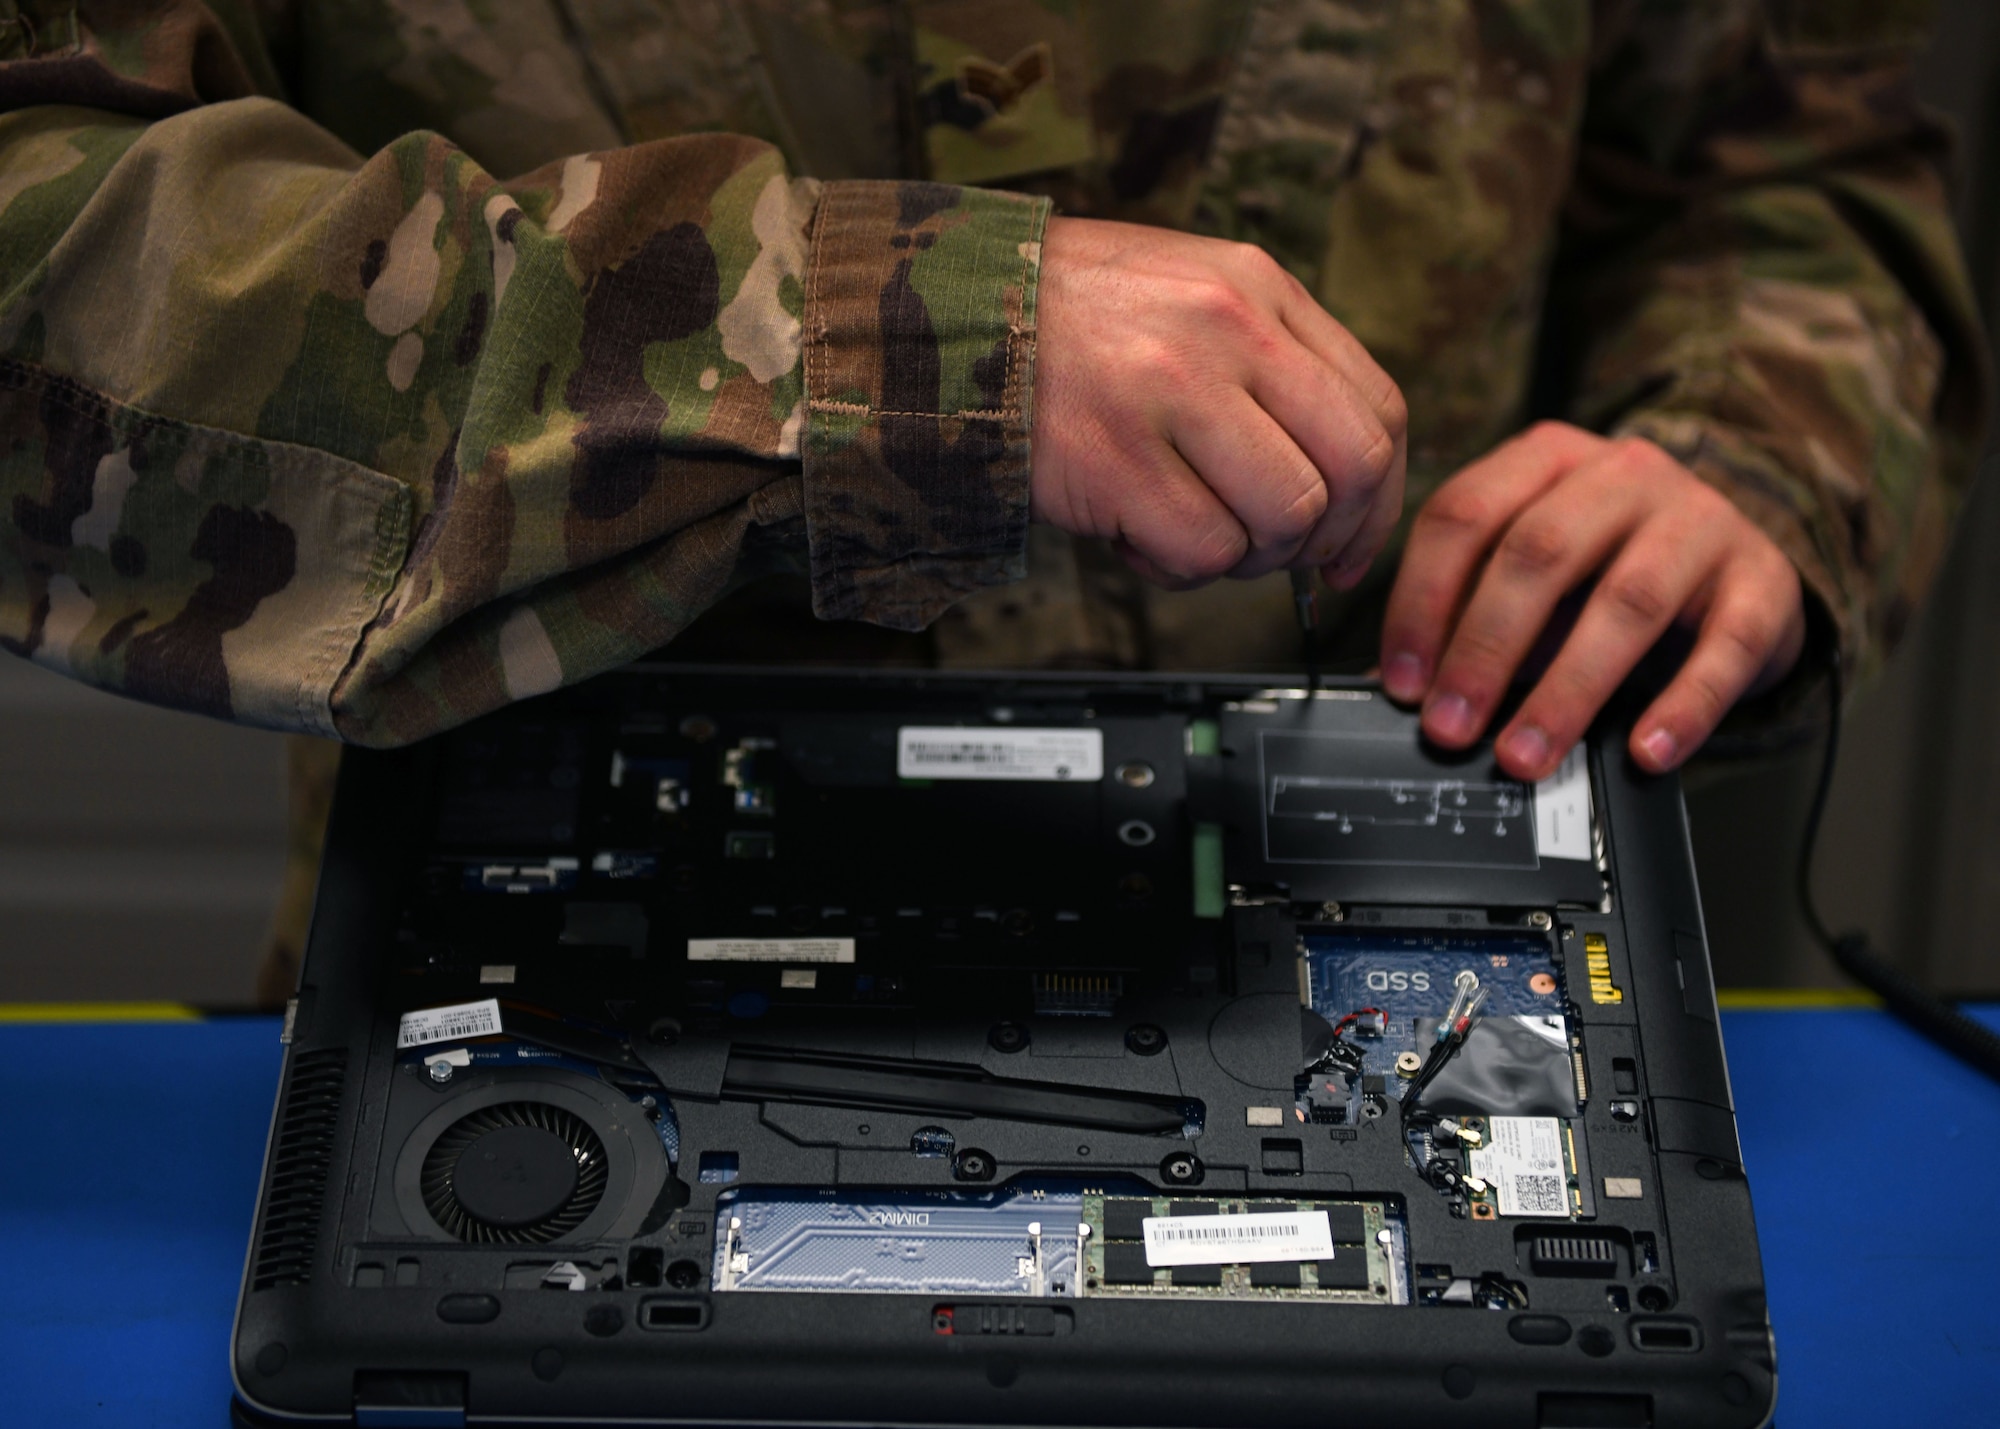 An Airman removes a screw from a laptop.